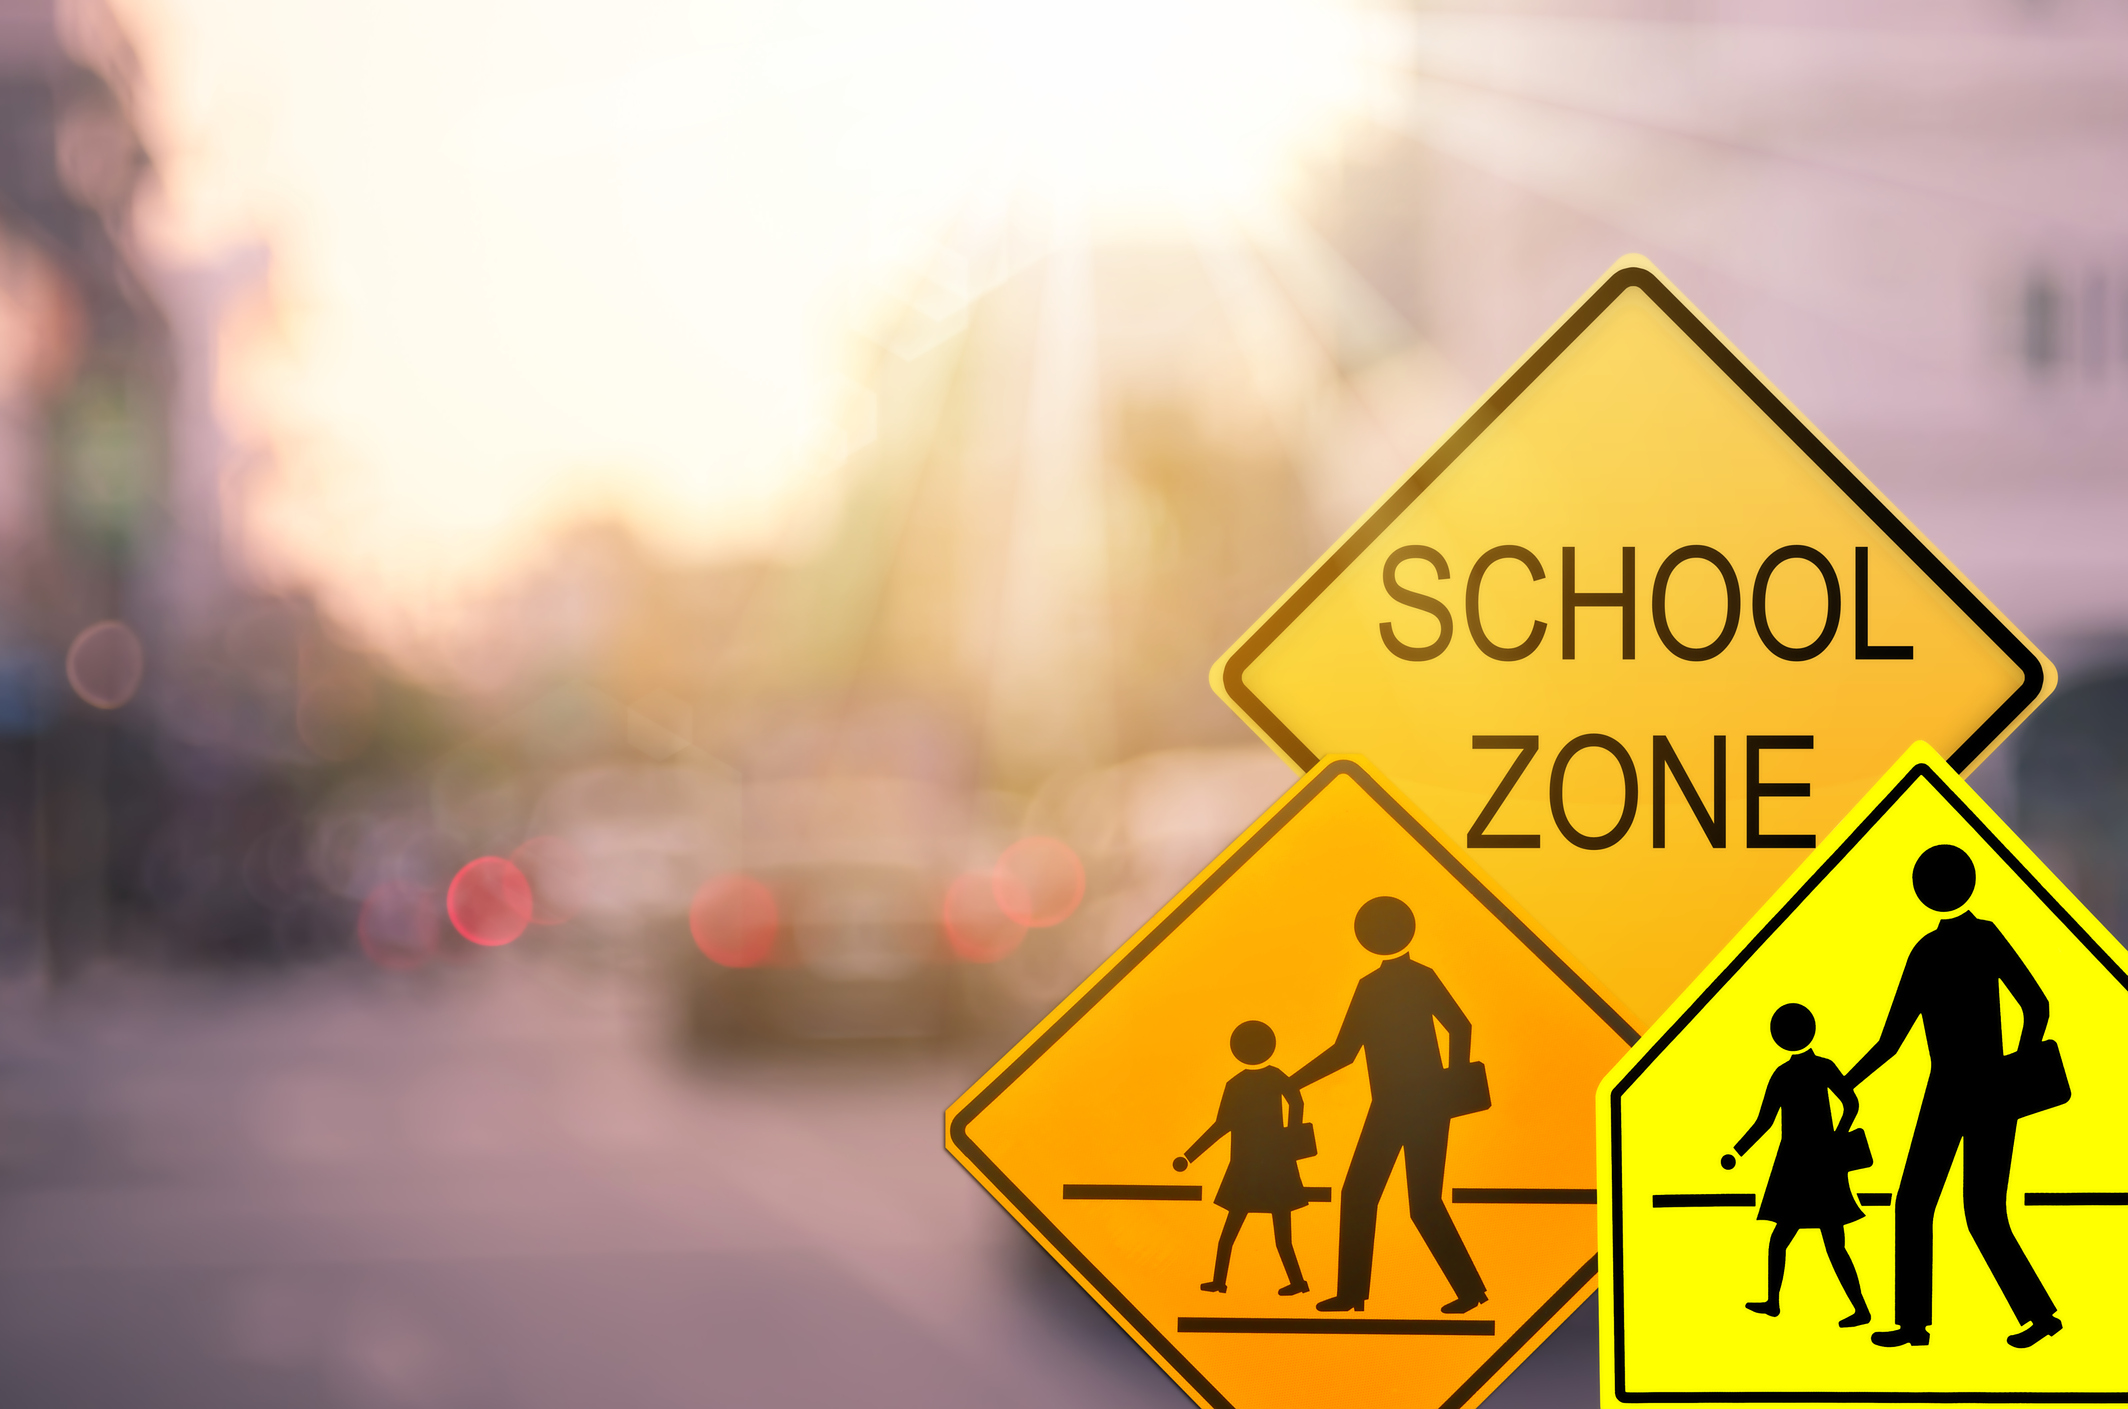 School zone warning sign on blurry road